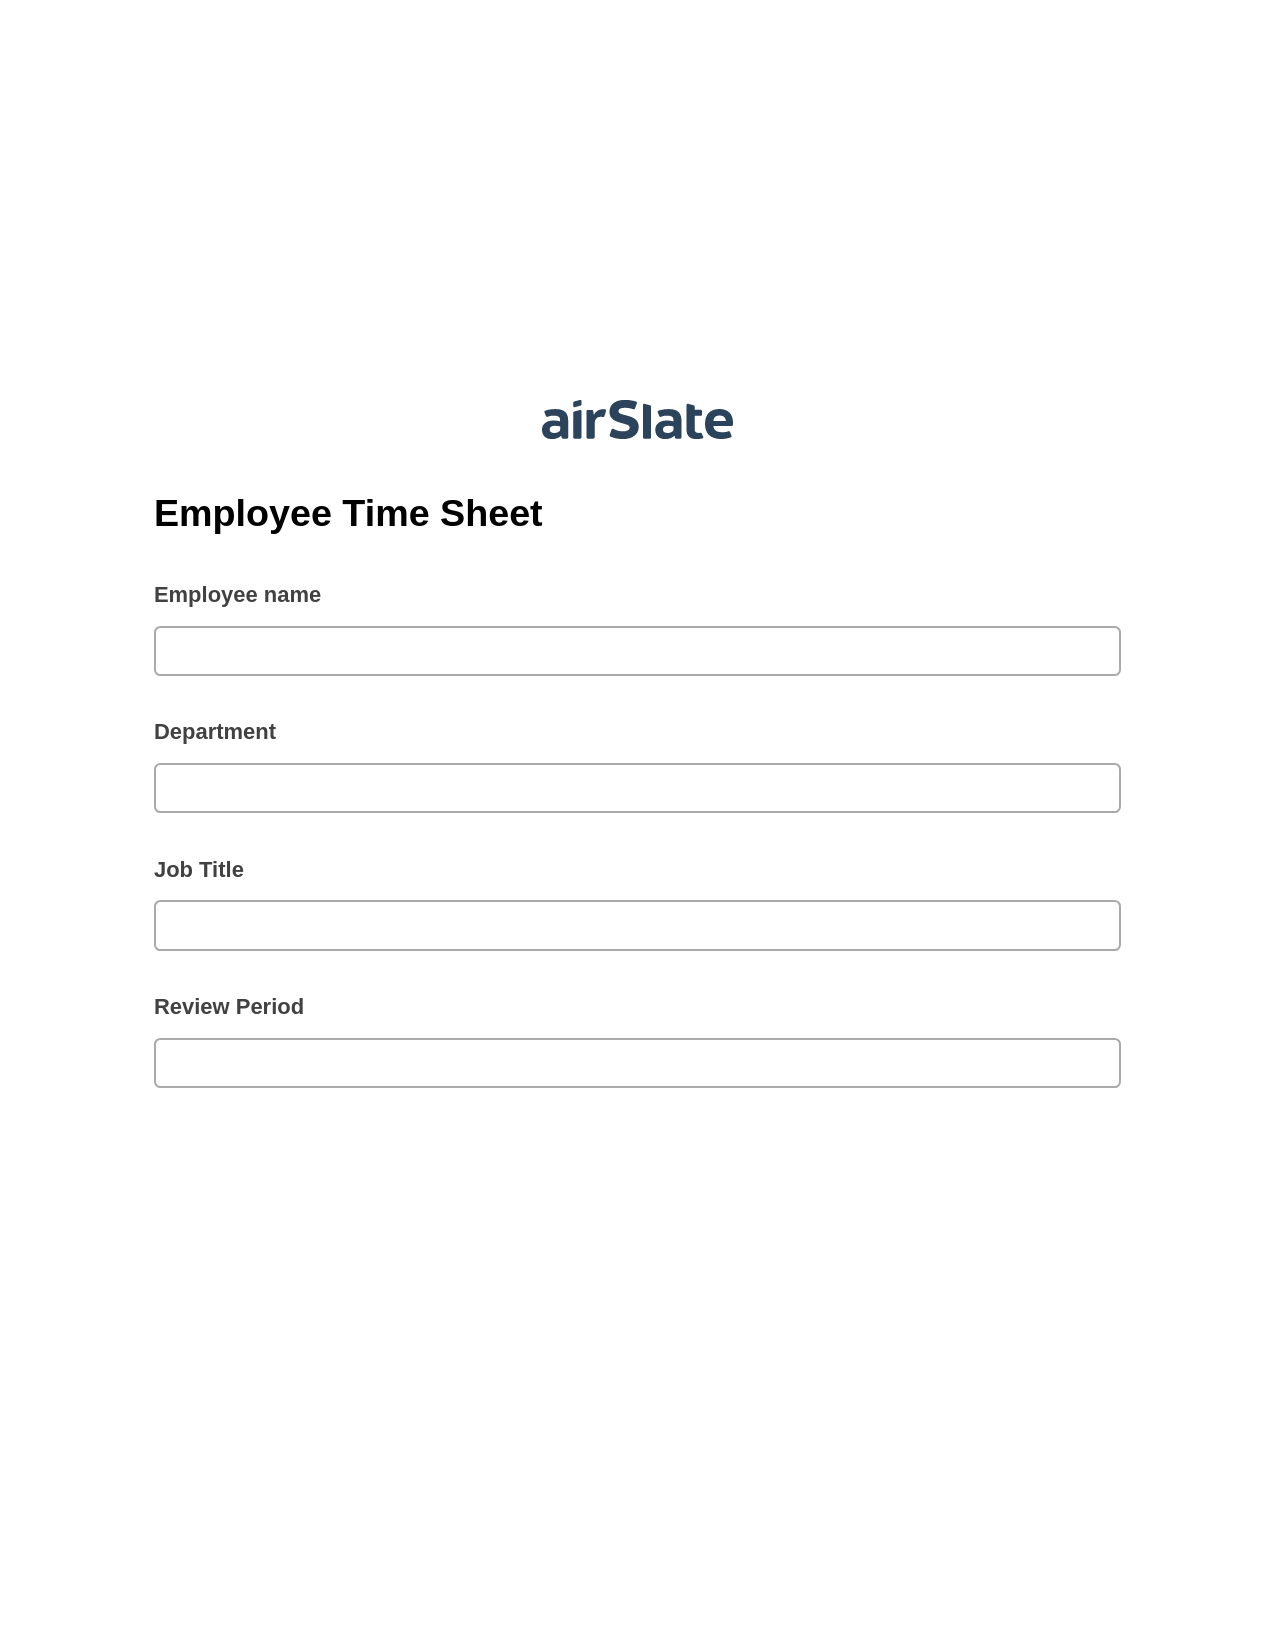 Employee Time Sheet Pre-fill Dropdowns from MySQL Bot, Update Audit Trail Bot, Email Notification Postfinish Bot